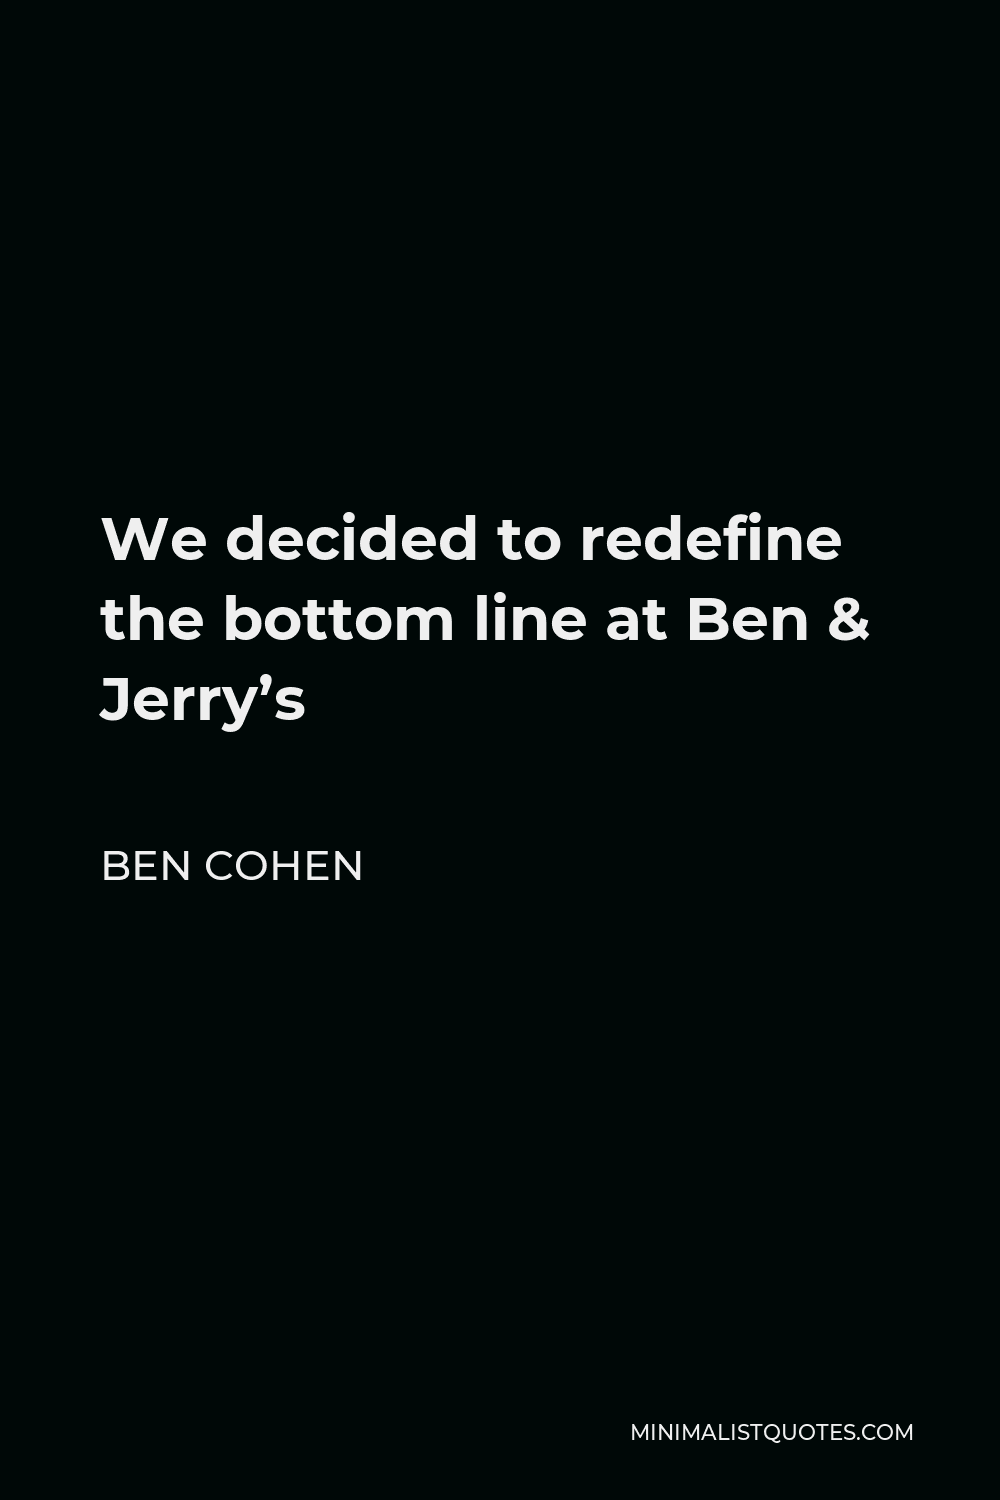 Ben Cohen Quote - We decided to redefine the bottom line at Ben & Jerry’s